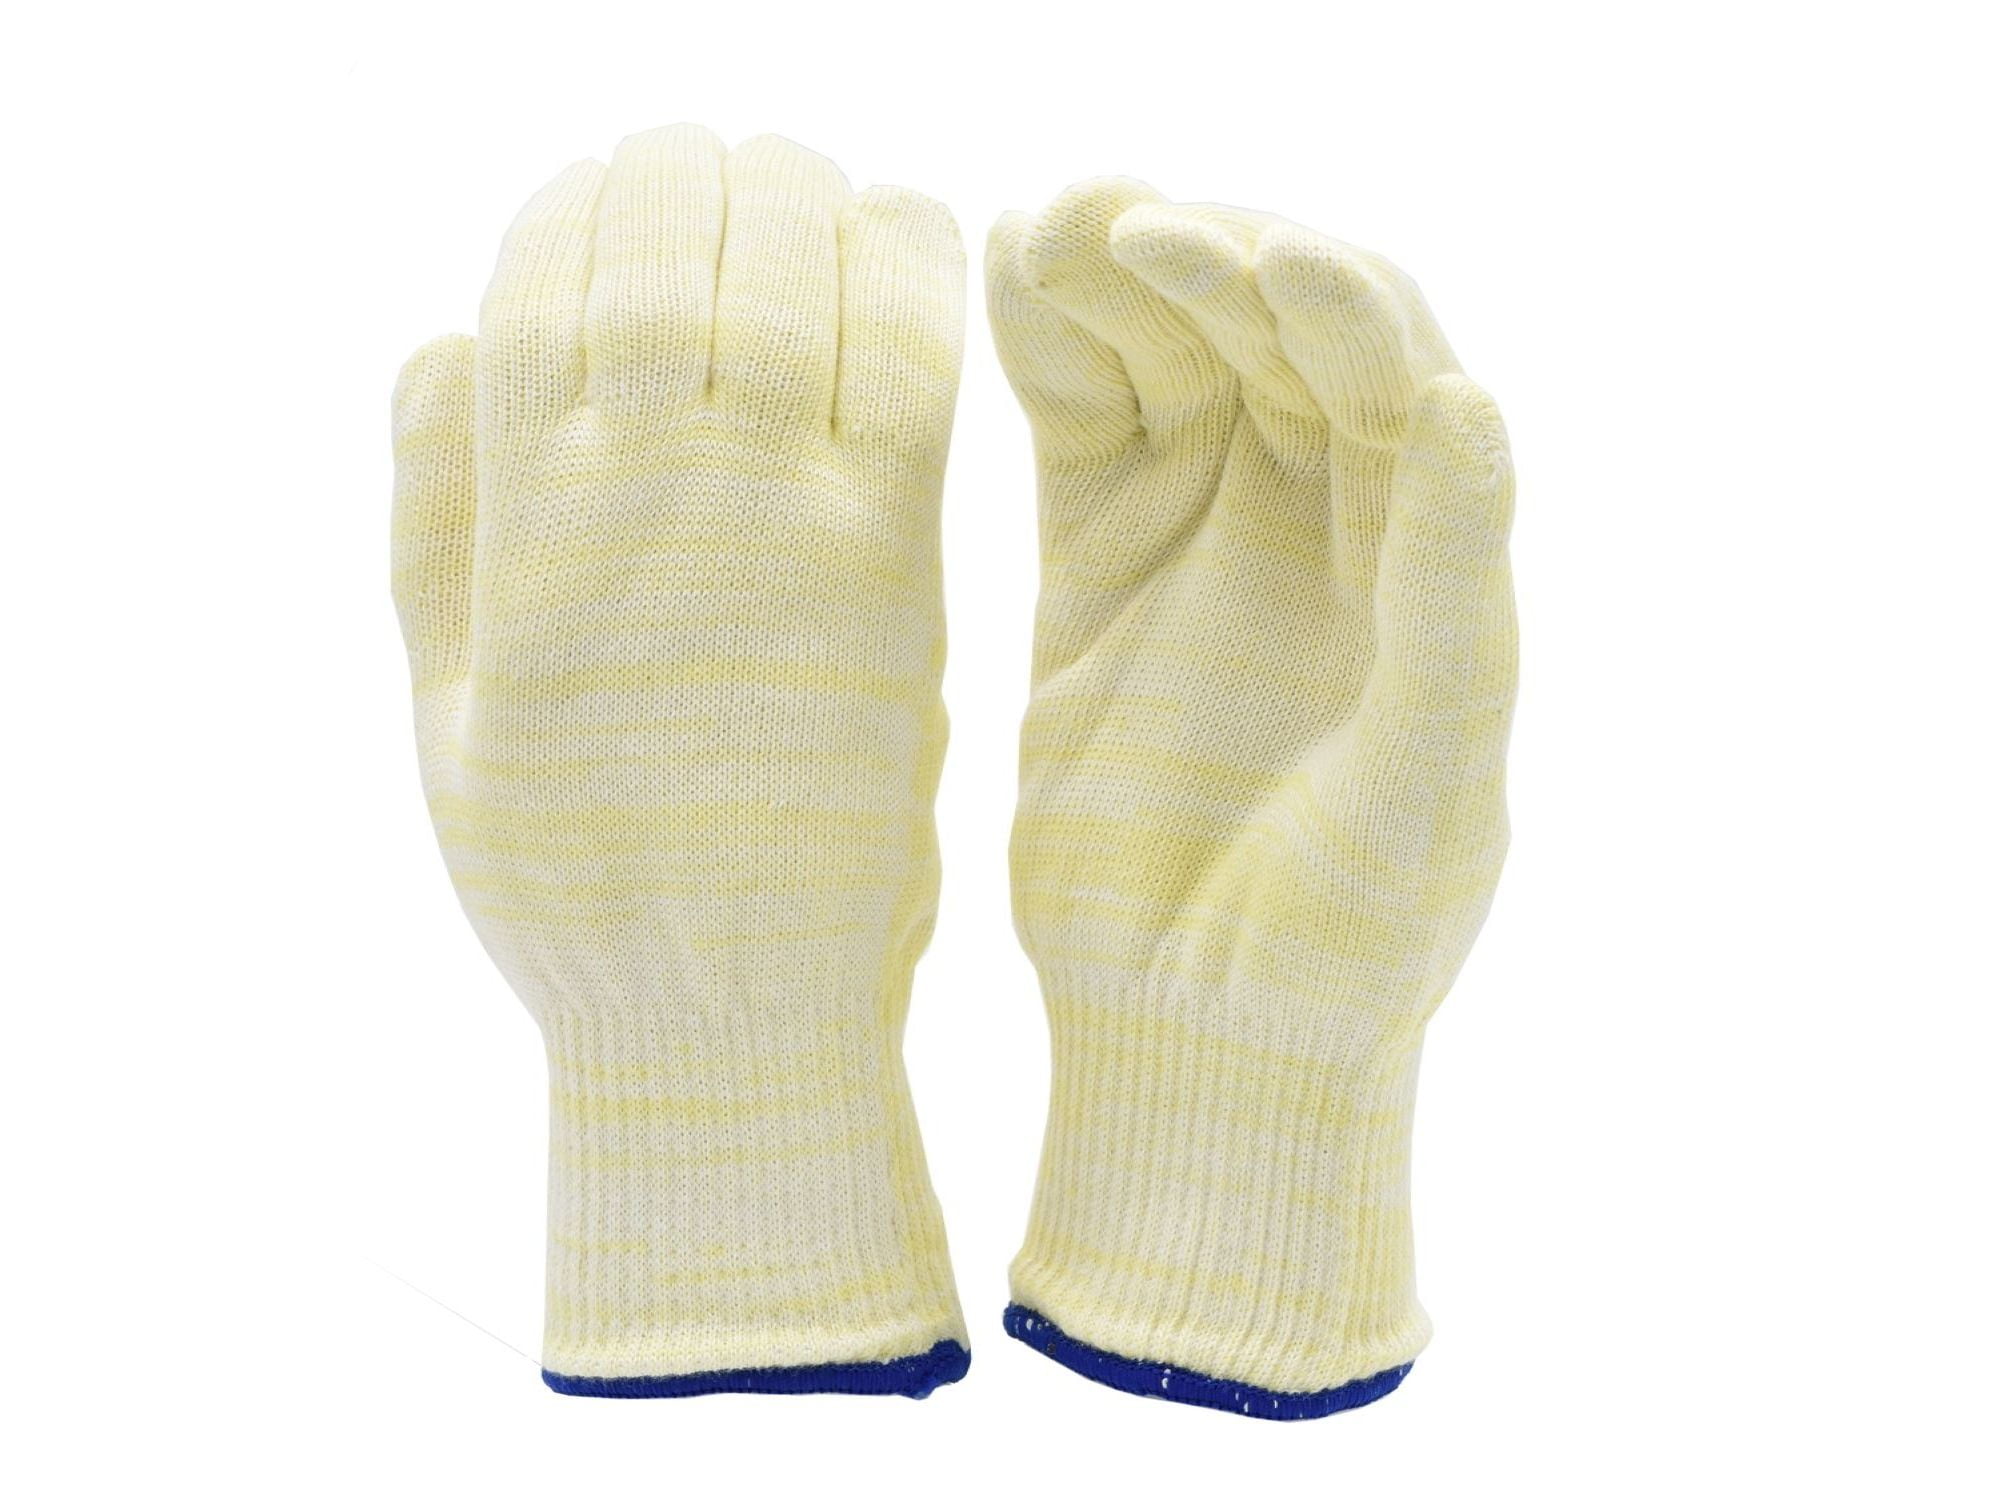 The 'Ove' Glove 2-Pack - Flame Resistant Oven Mitt - Yellow - Heat  Resistant up to 540 Degrees Fahrenheit - Multi-Functional in the Kitchen  Towels department at